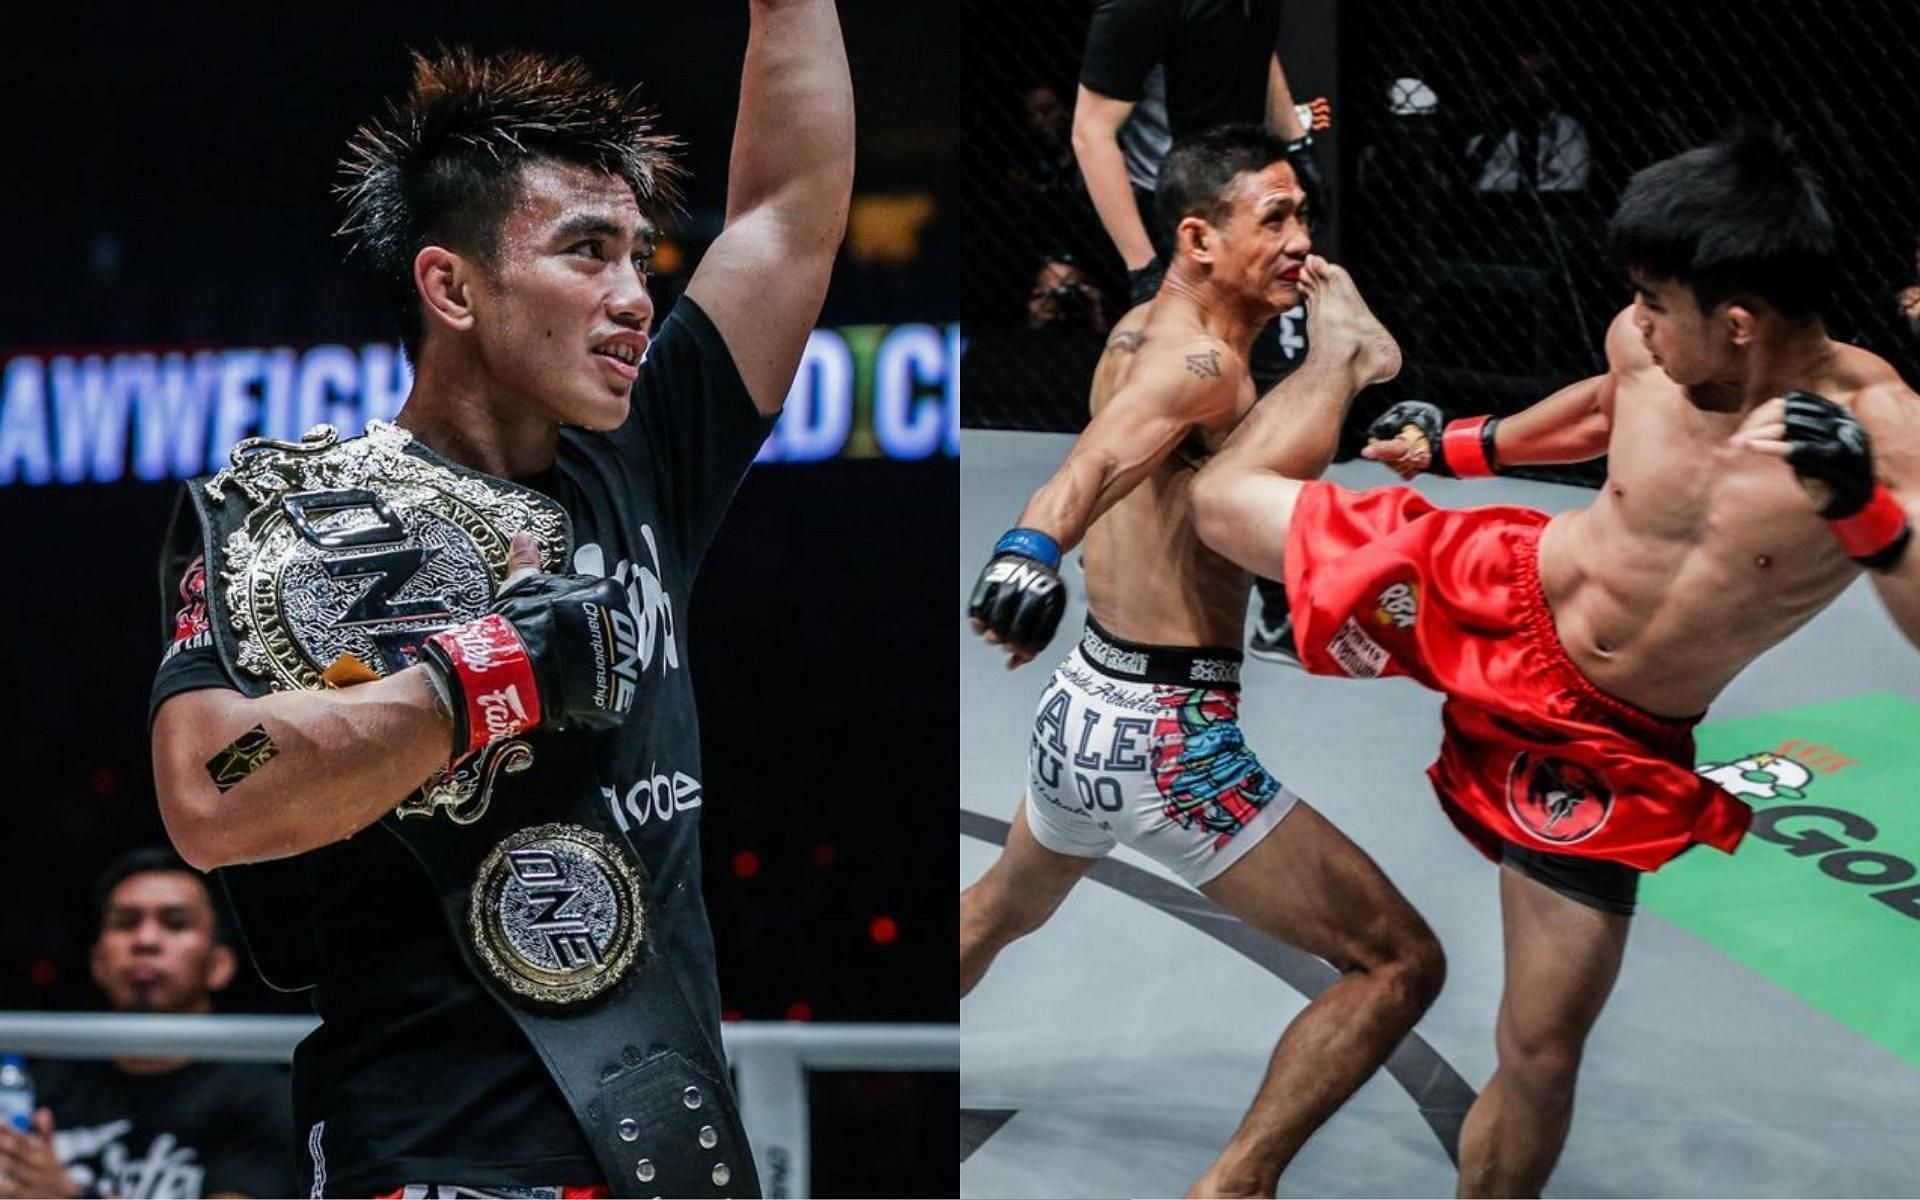 ONE Championship strawweight champ Joshua Pacio defeated Roy Doliguez back in 2017. (Images courtesy of ONE Championship)